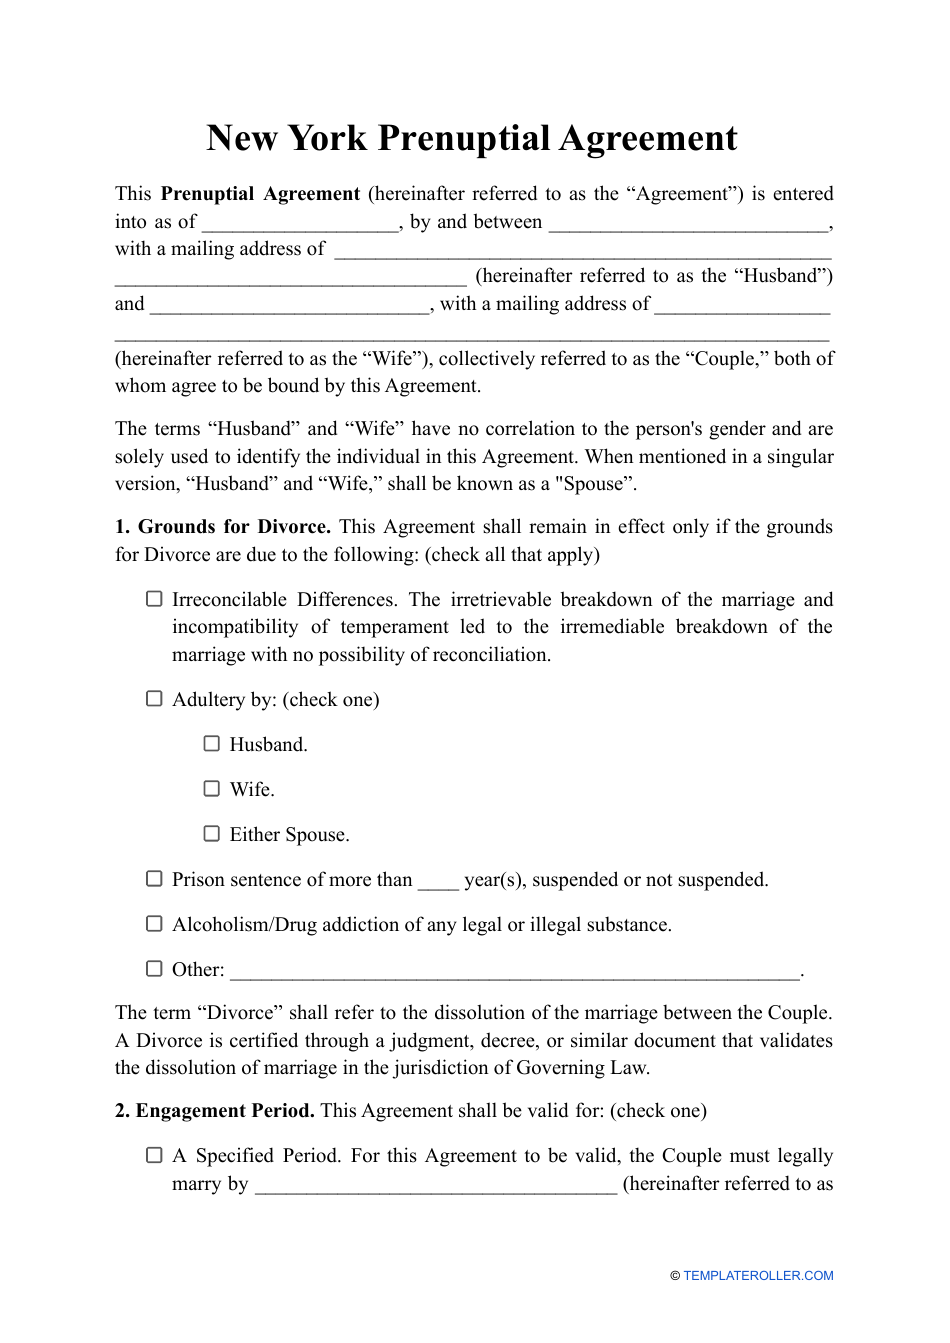 Prenuptial Agreement Template - New York, Page 1